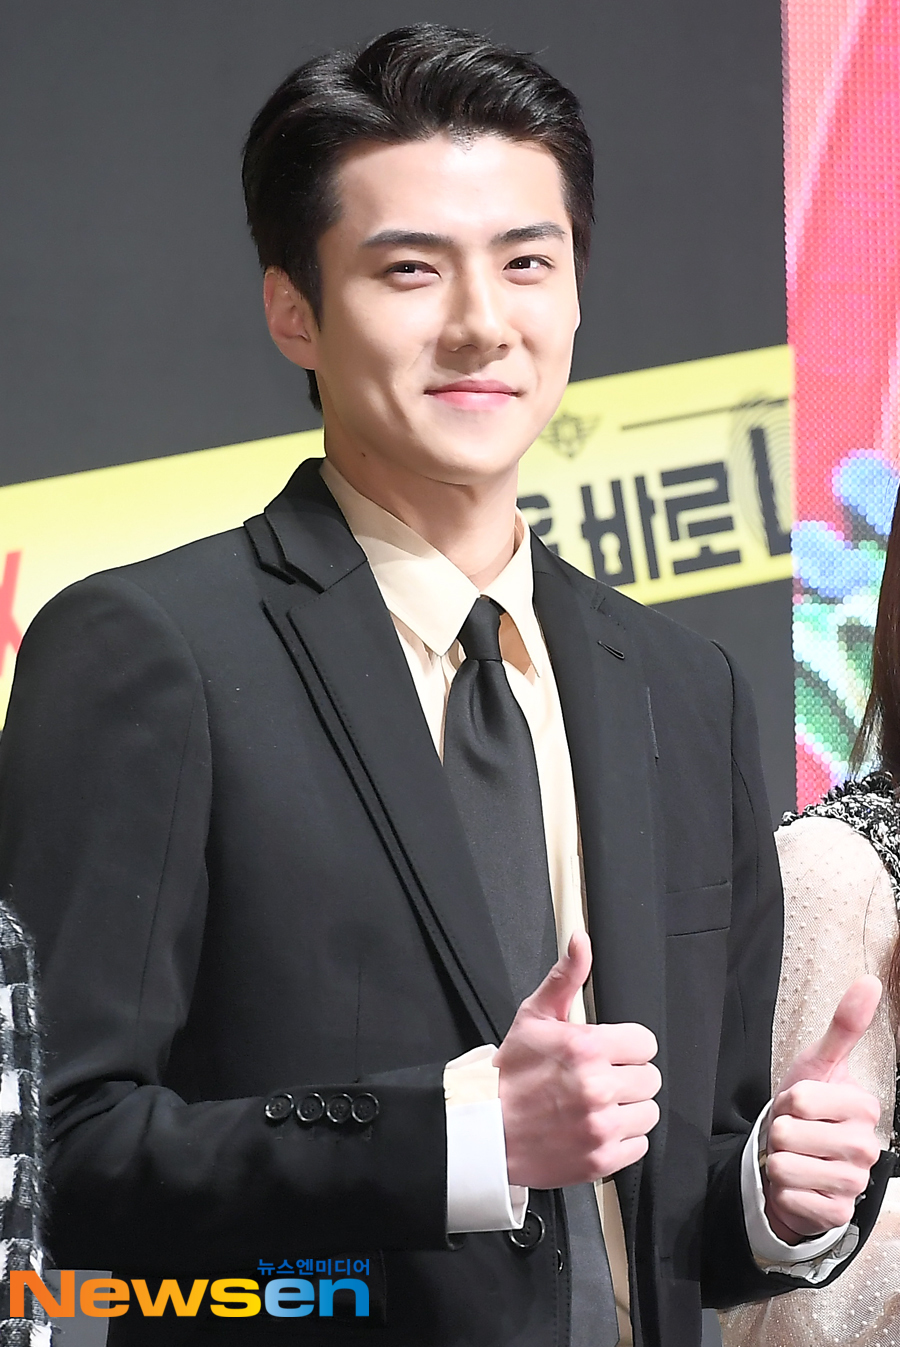 Netflix Baro You! Season 2 production presentation was held at CGV Apgujeong, Gangnam-gu, Seoul on November 8th.EXO Sehun poses on the day.The Beginner is Baro You!, which stars Yoo Jae-seok, Kim Jong-min, Lee Seung-gi, Park Min-young, EXO Sehun, and former club Kim Se-jung, is a program about the full-fledged life and life variety of the Huhdang detective team, who is busy with hands and feet due to its reasoning.Jung Yoo-jin